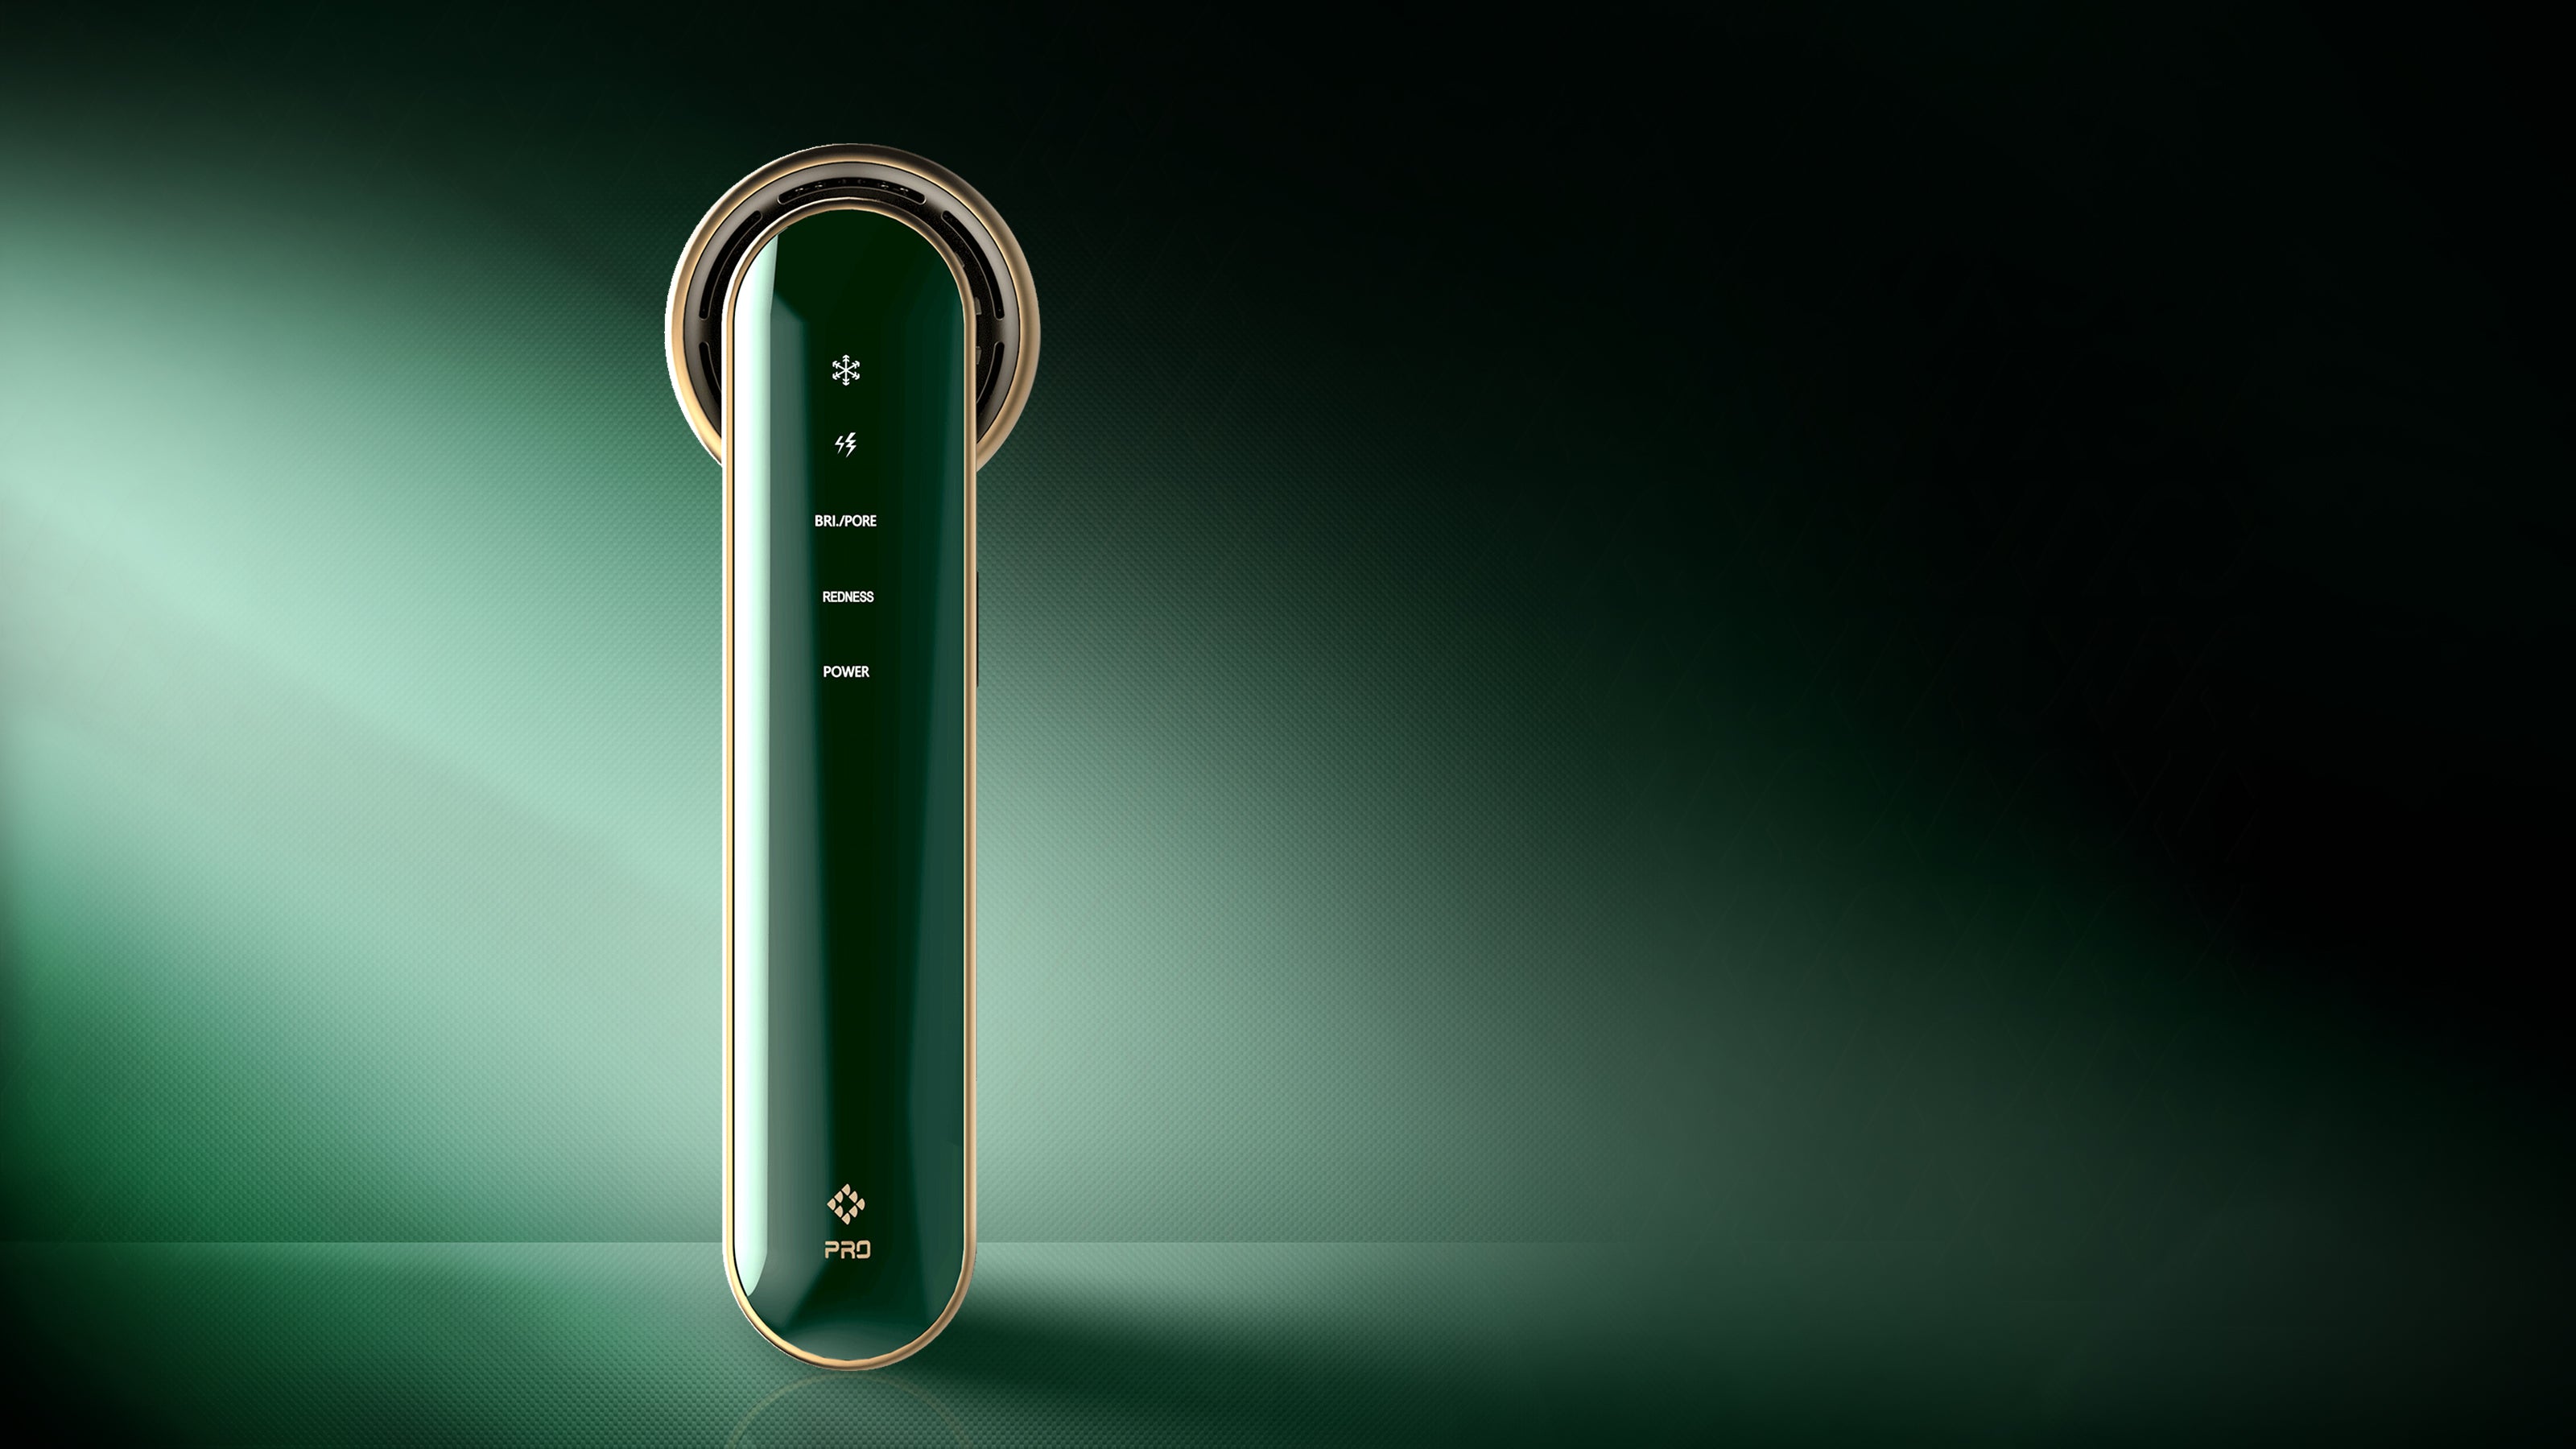 JOVS Blacken PRO DPL Photofacial Skincare Device displayed against a gradient green backdrop, emphasizing its sleek design and innovative treatment modes.